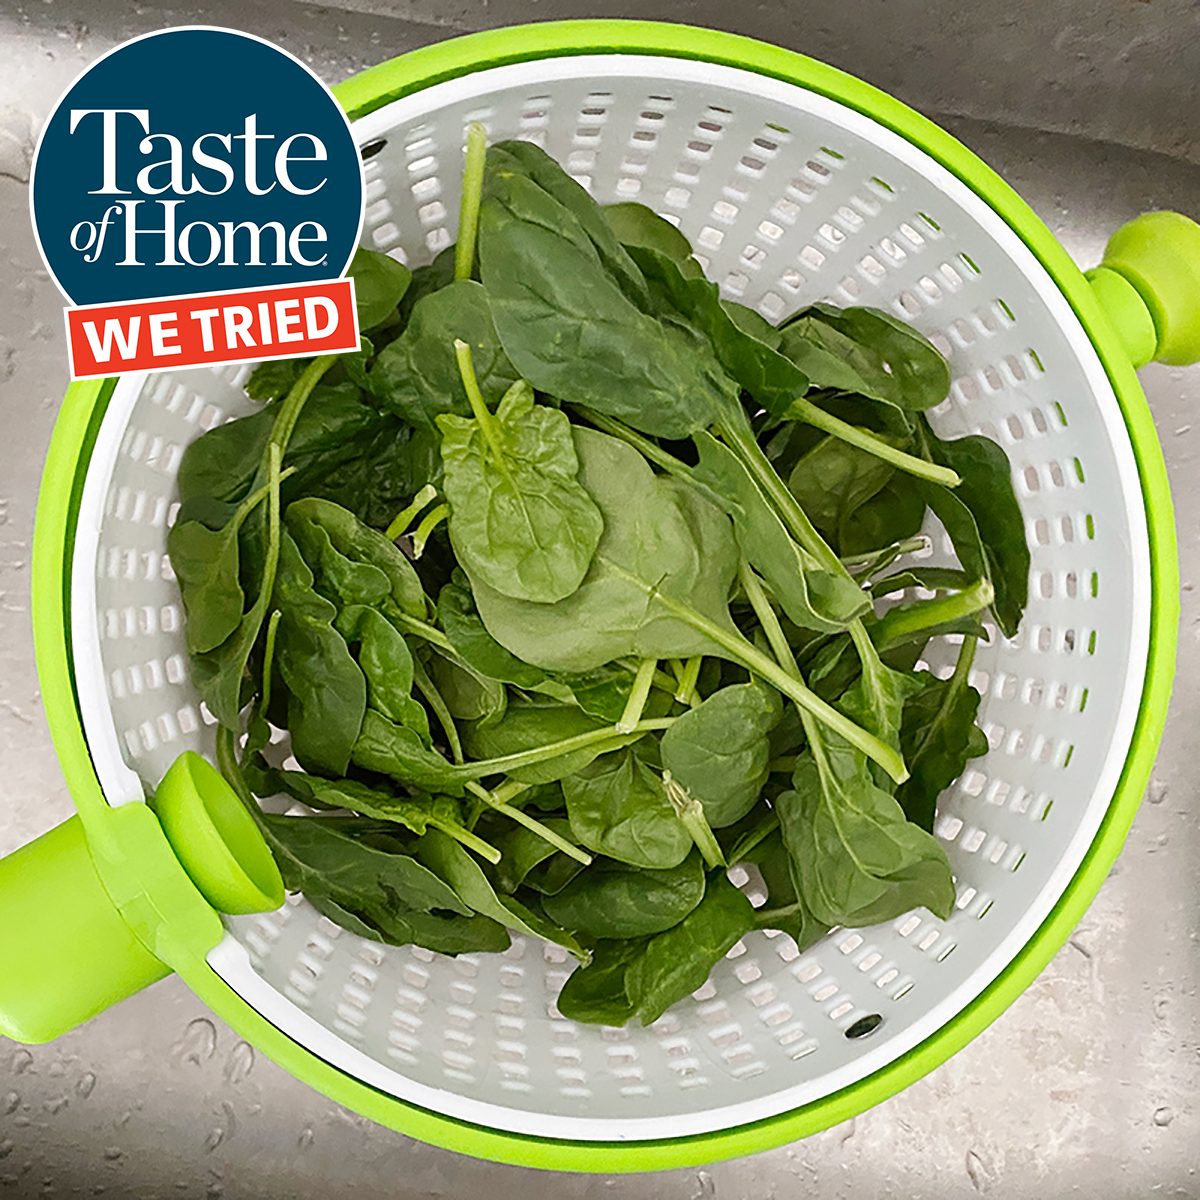 Easy-to-use Salad Spinner > Non-scratch, Nylon Spinning Colander > Lettuce  Spinner > Colander With Collapsible Handle